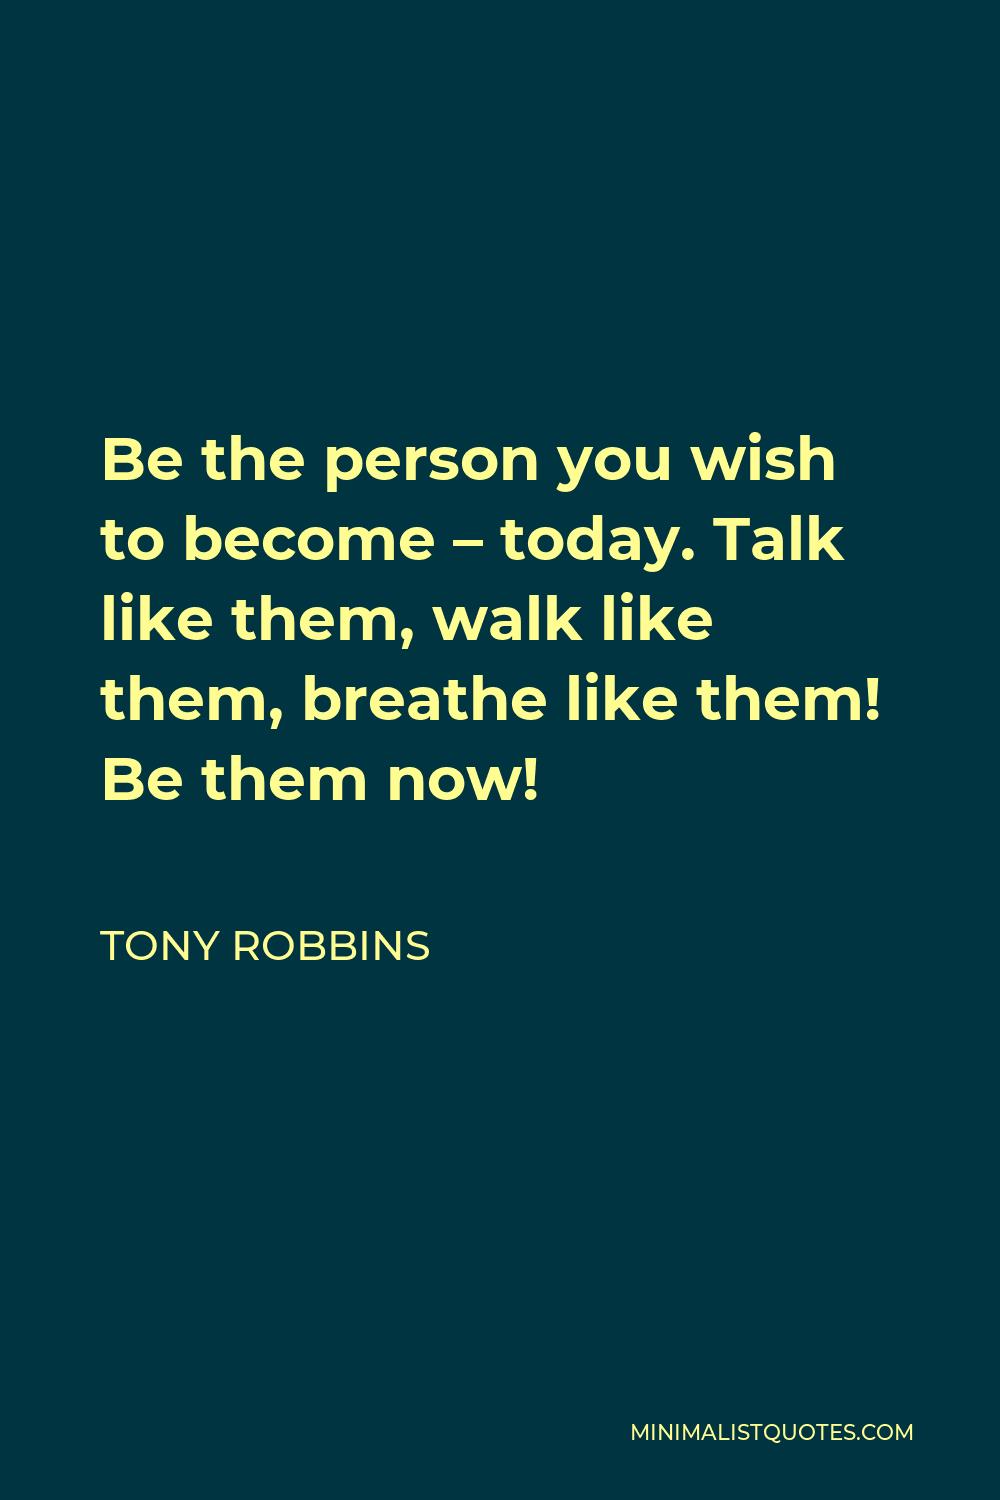 Tony Robbins Quote - Be the person you wish to become – today. Talk like them, walk like them, breathe like them! Be them now!